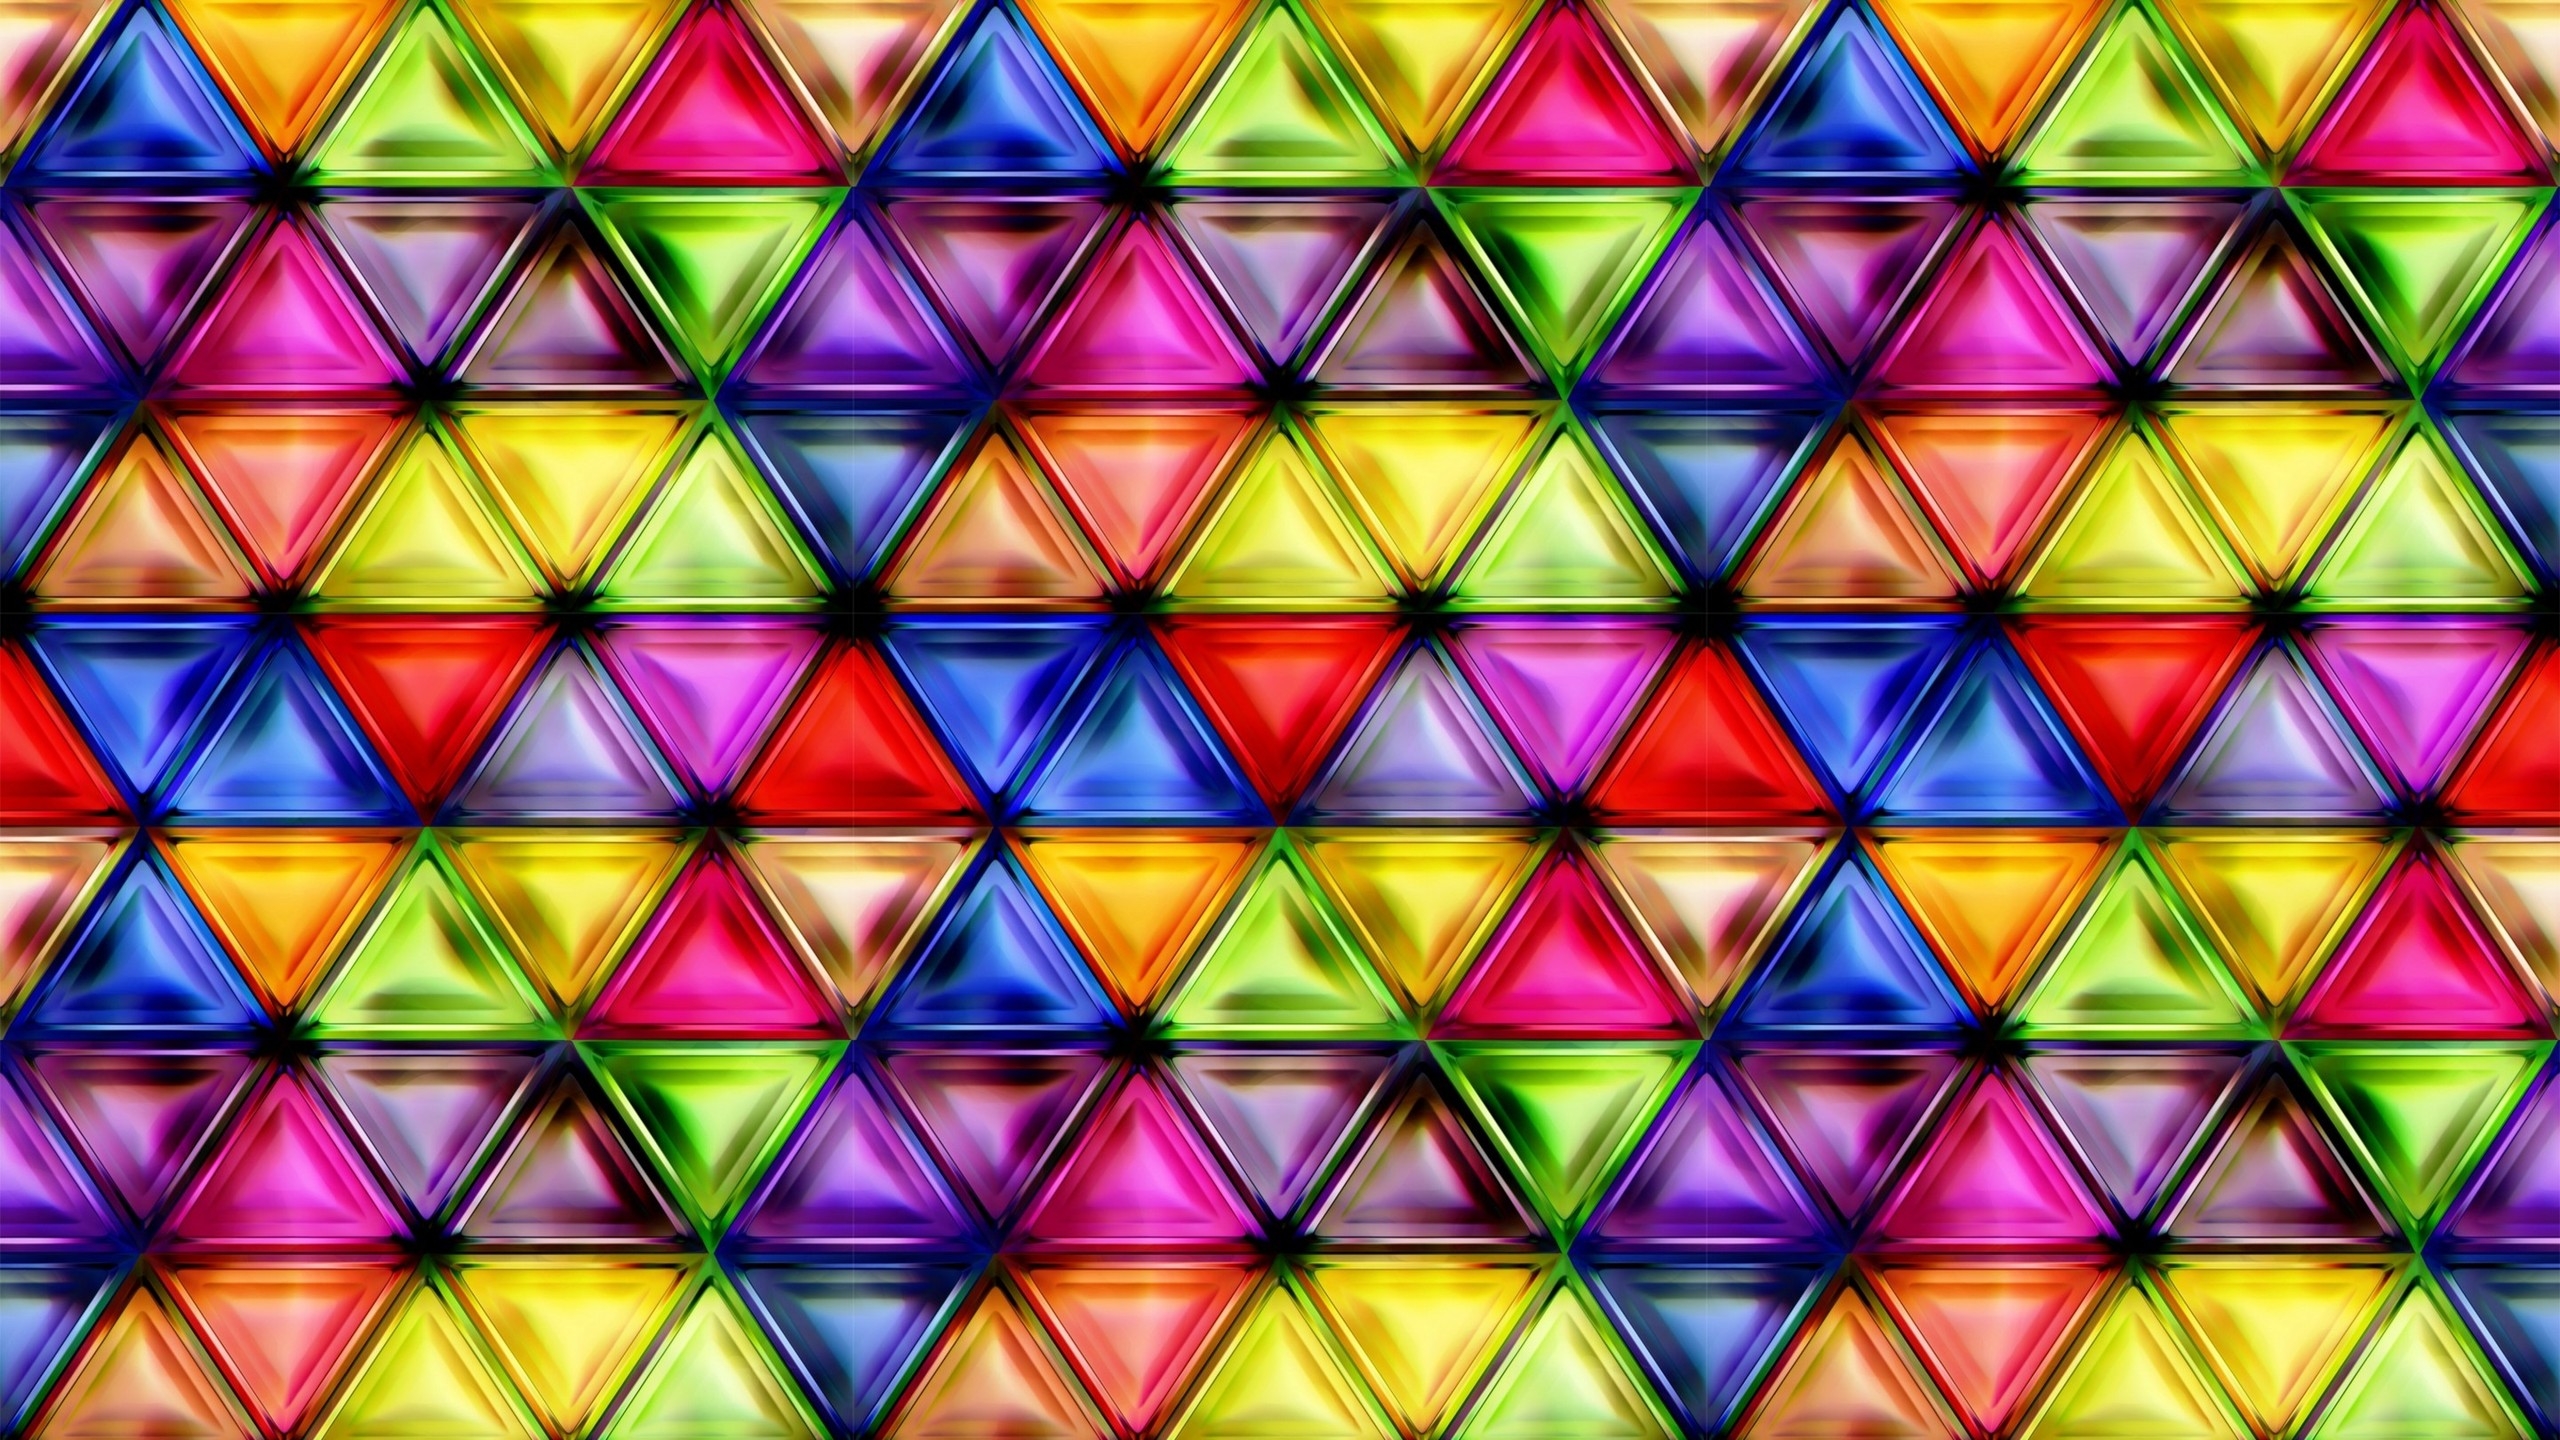 Multicolored Glass  for 2560x1440 HDTV resolution